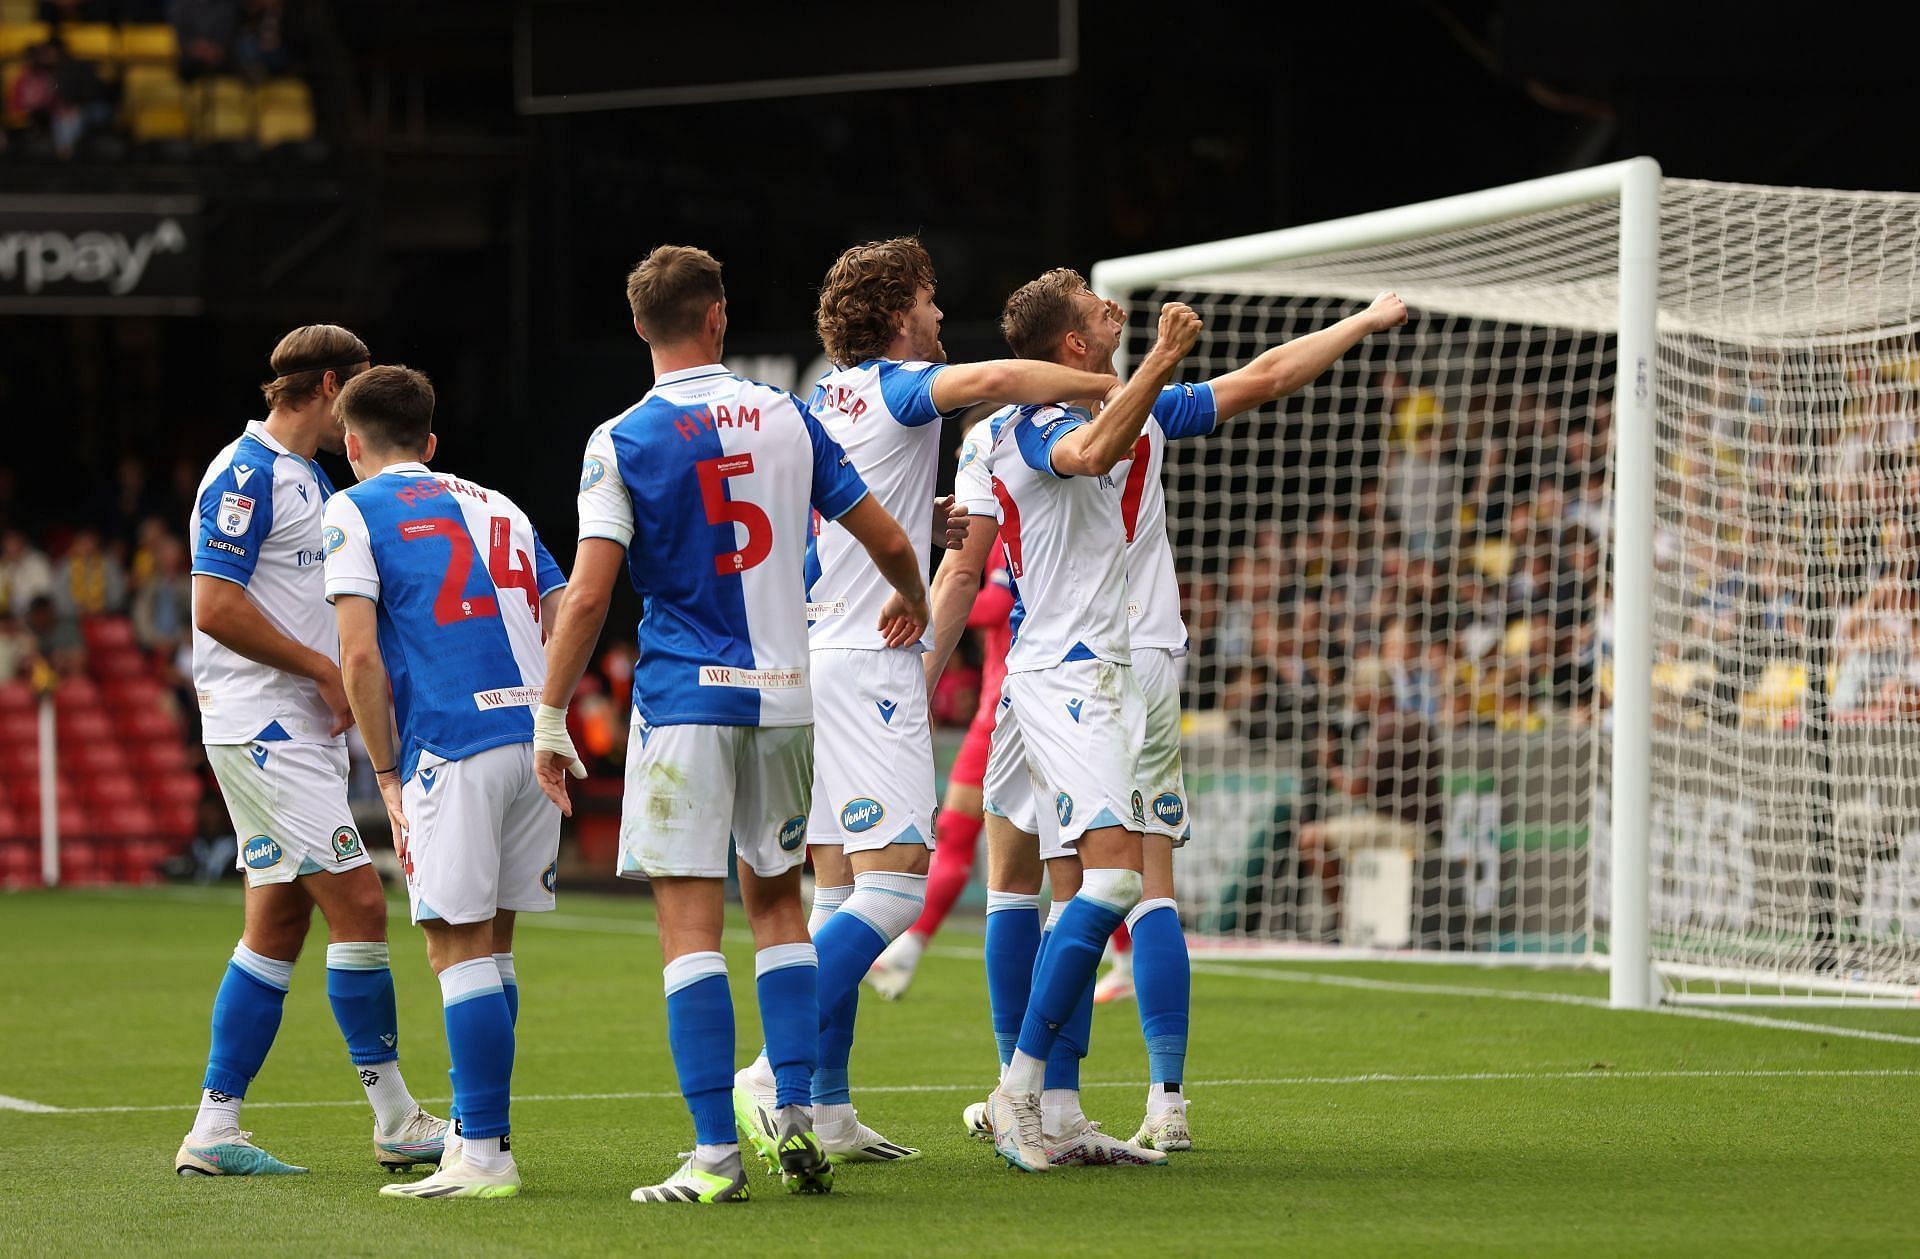 Blackburn Rovers will face Middlebrough on Saturday 